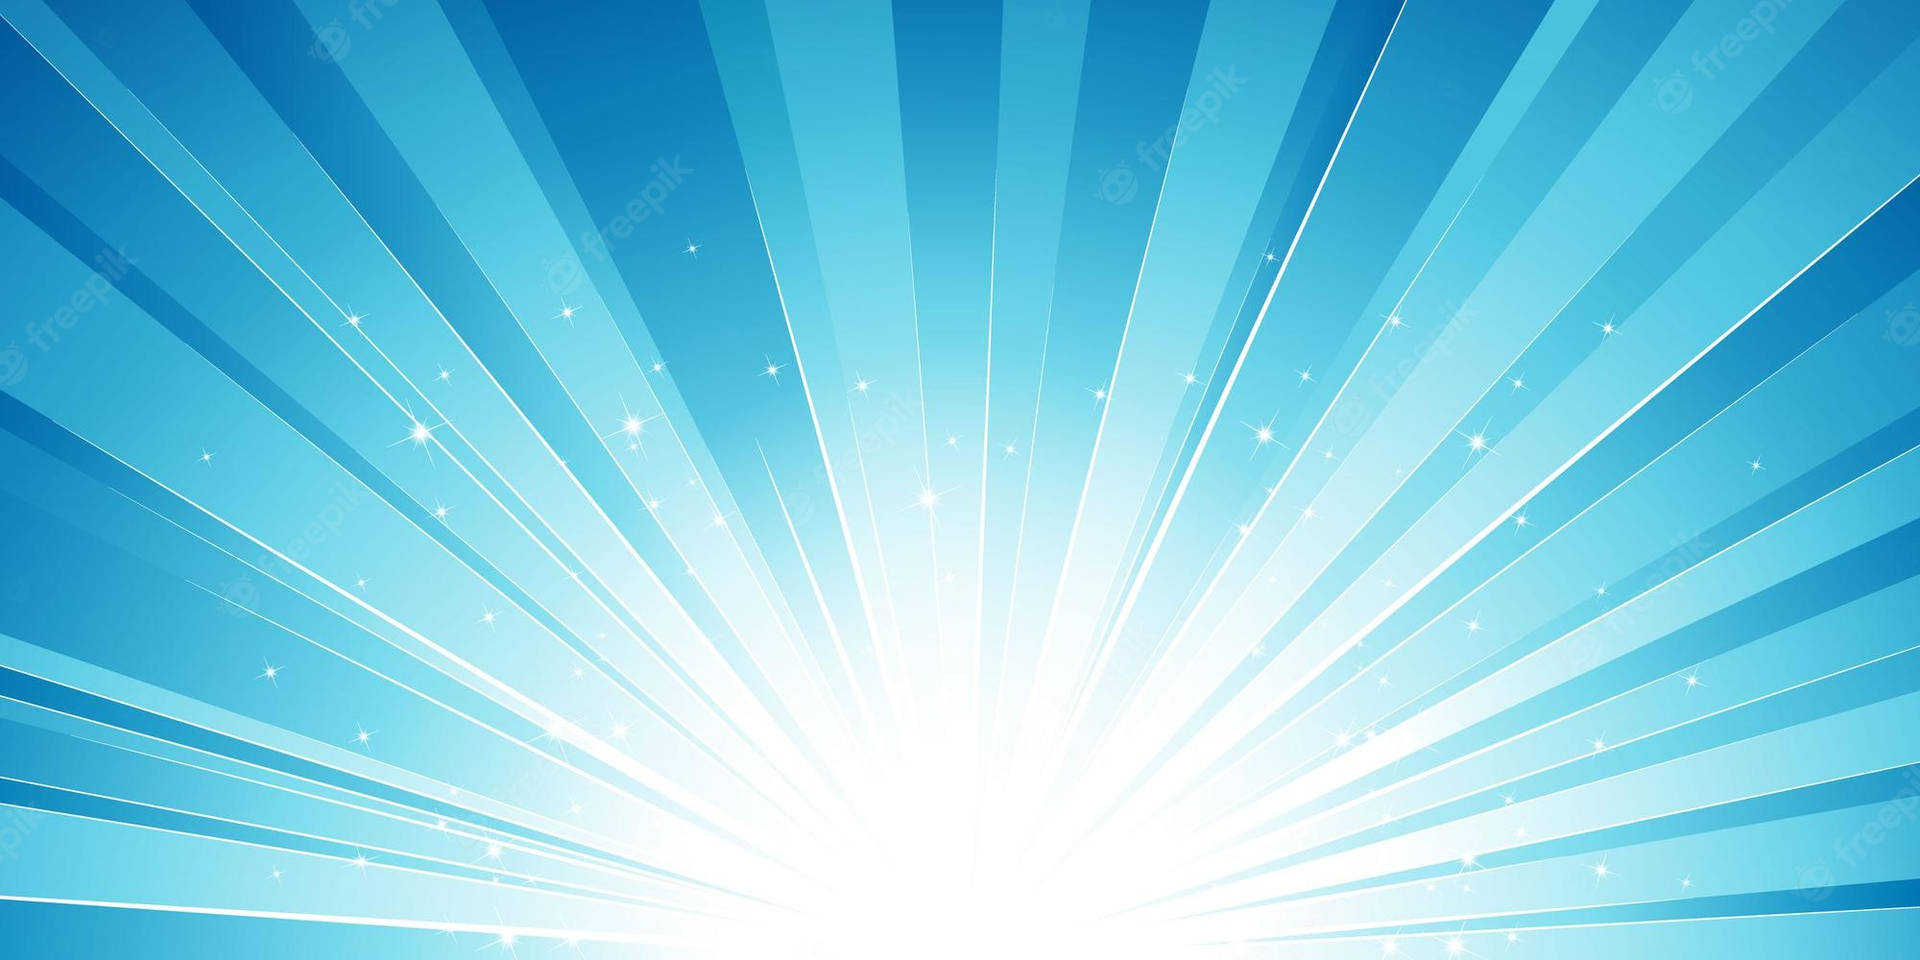 Blue Rays Bright Background Wallpaper